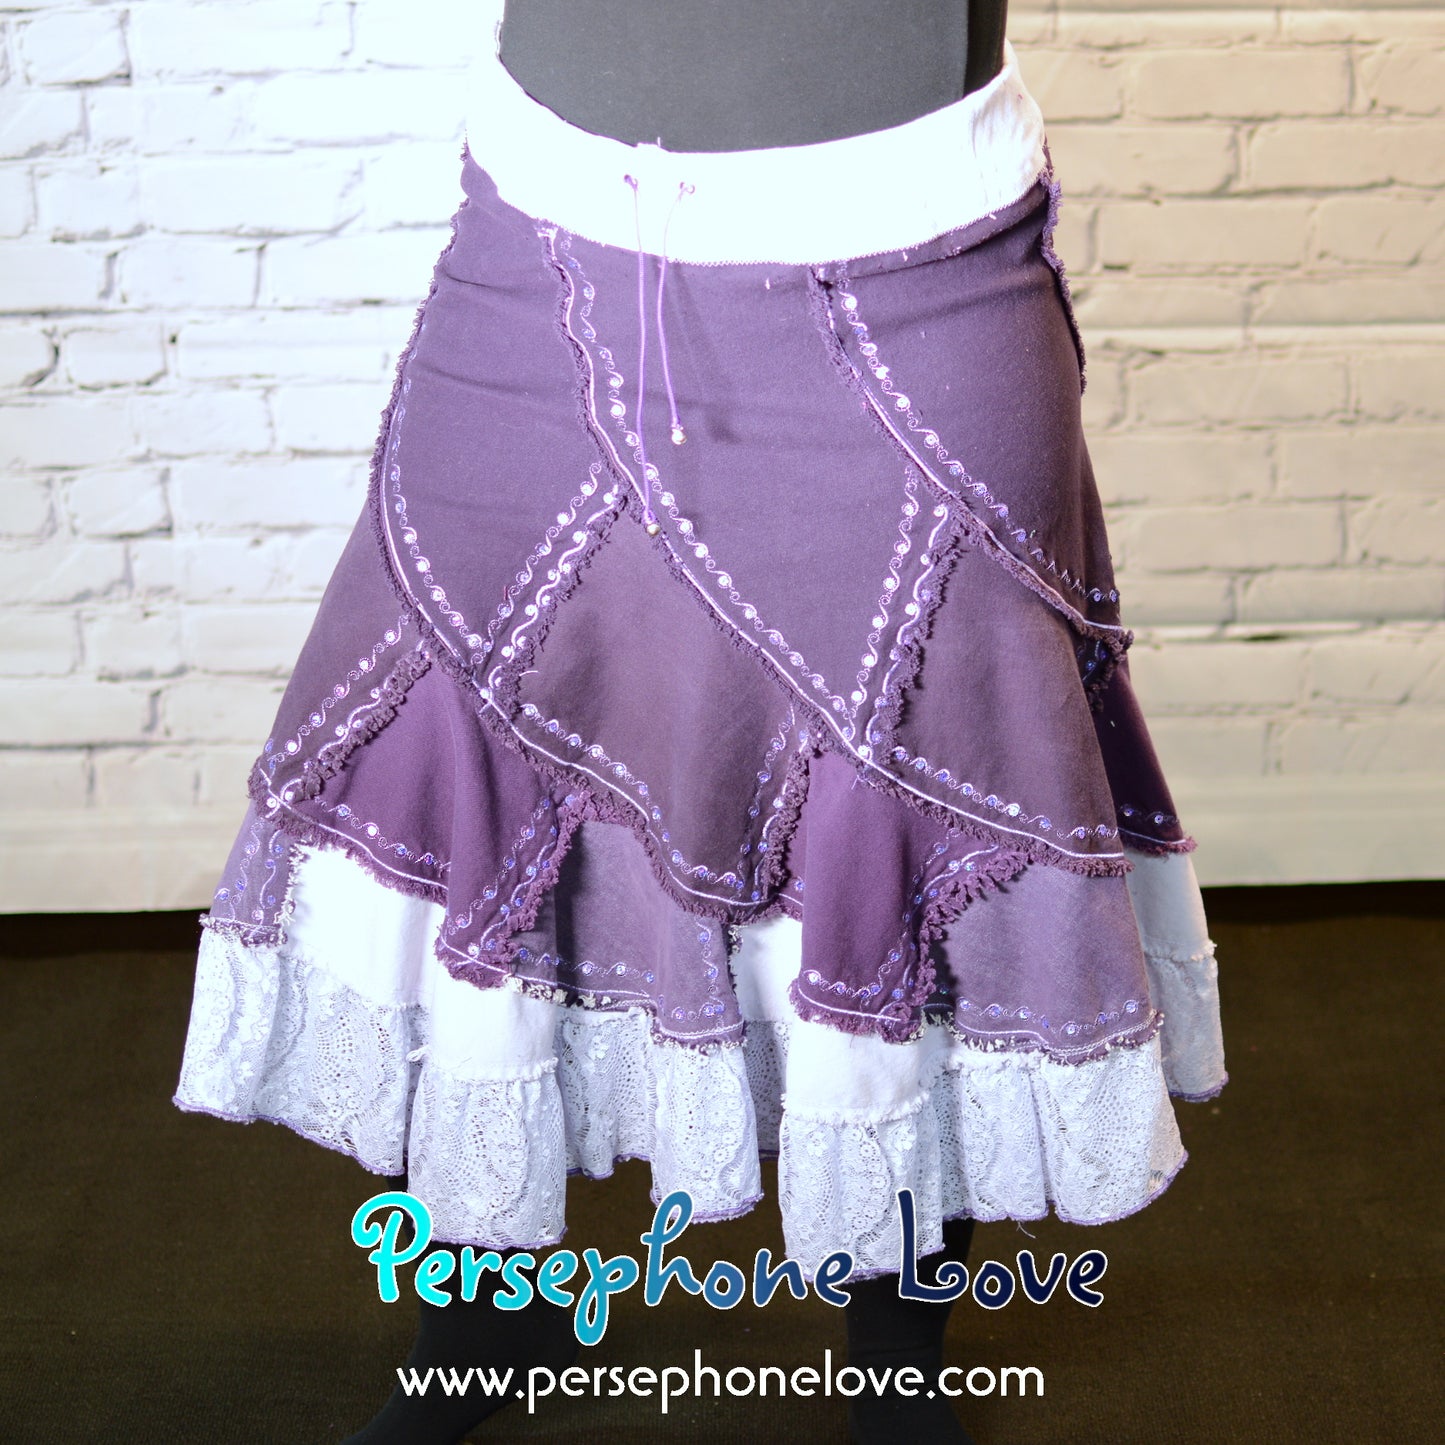 Purple ombre patchwork denim upcycled twirly spiral festival skirt embroidery sequins-2000